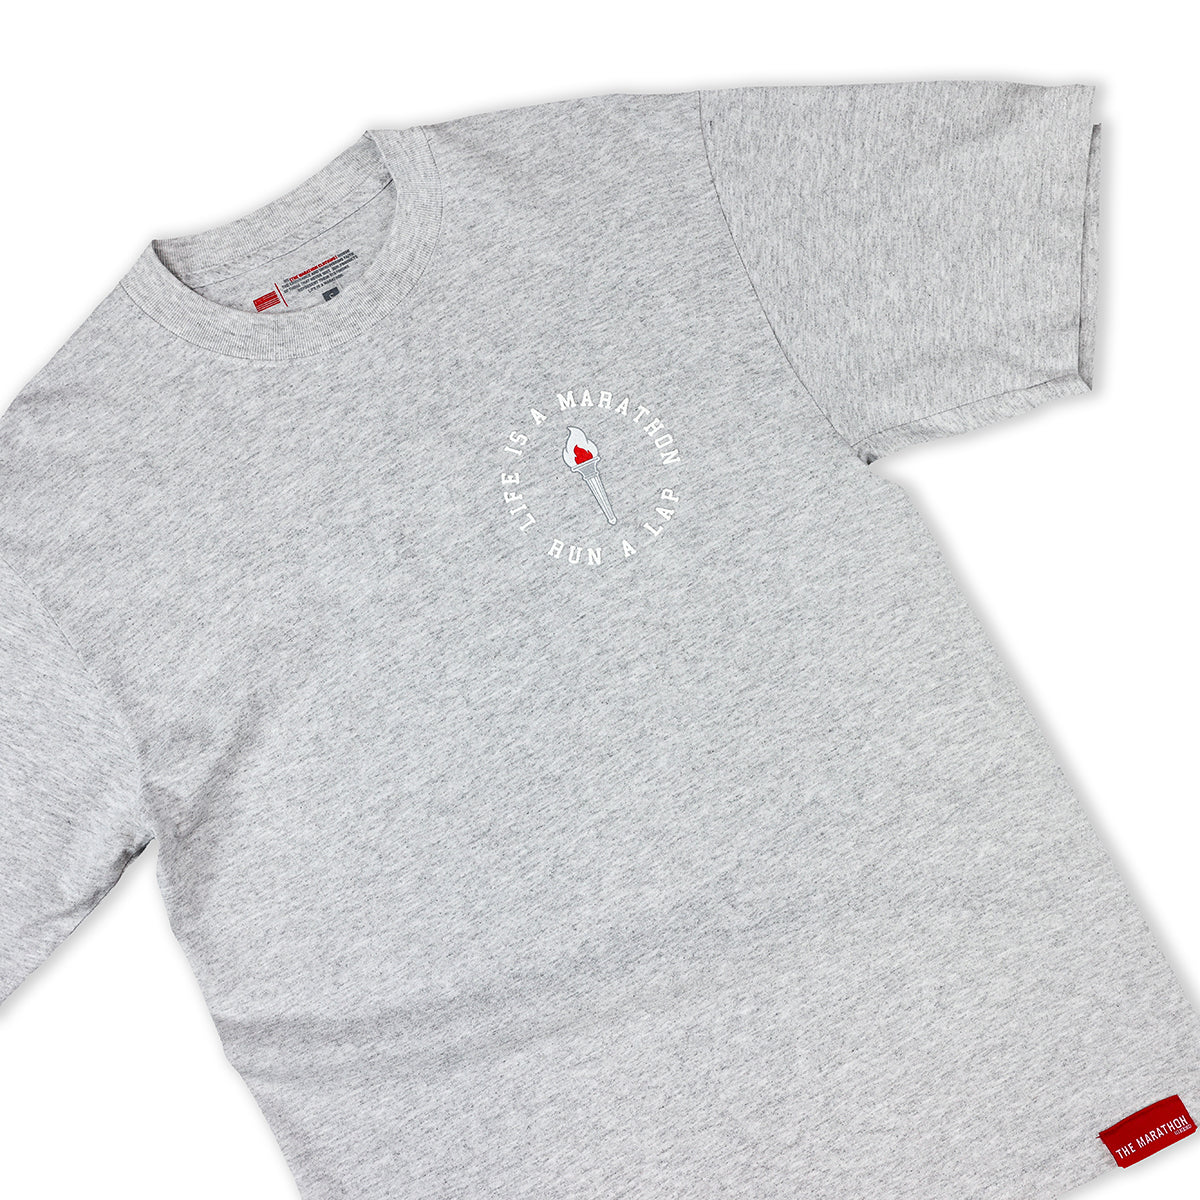 Victory Torch T-Shirt - Soft Grey - Front Detail